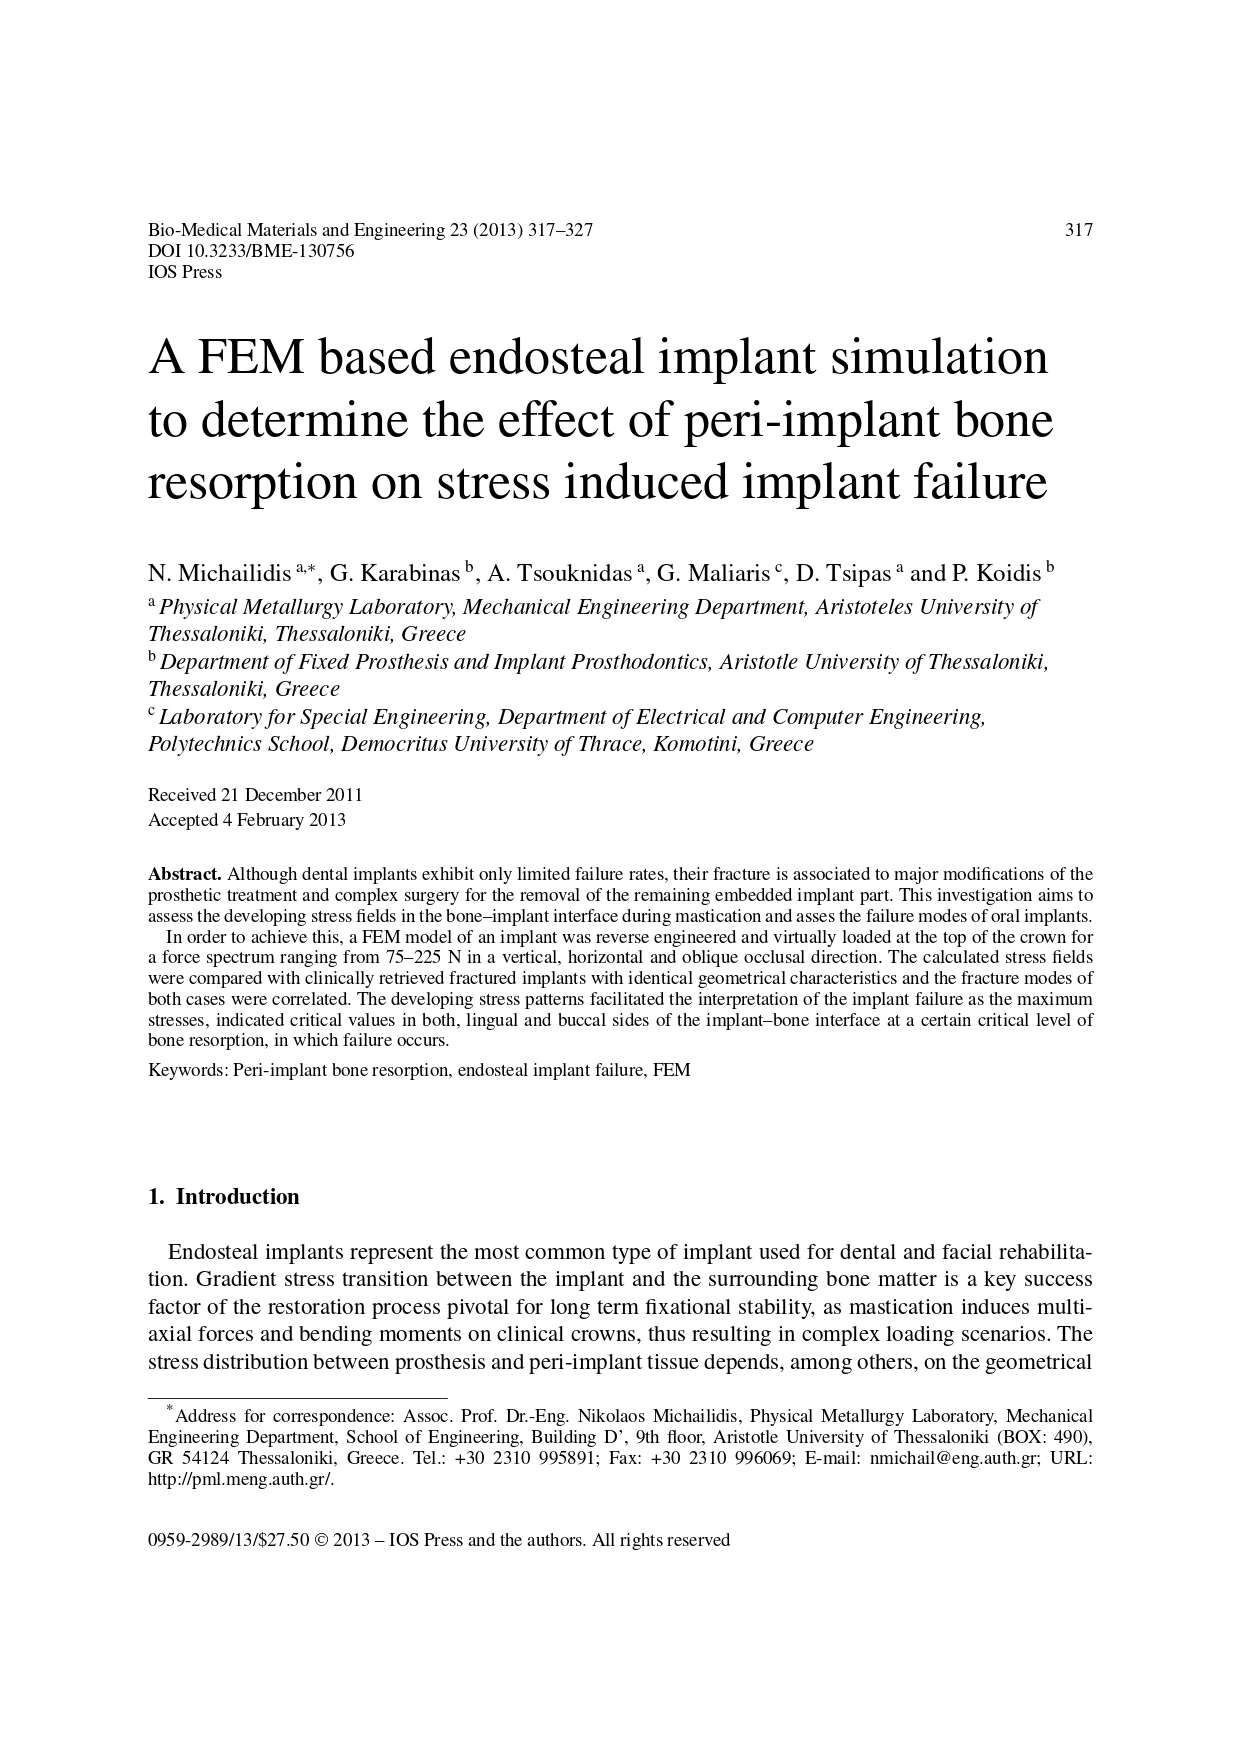 A FEM based endosteal implant simulation to determine the effect of peri-implant bone resorption on stress induced implant failure_page-0001.jpg